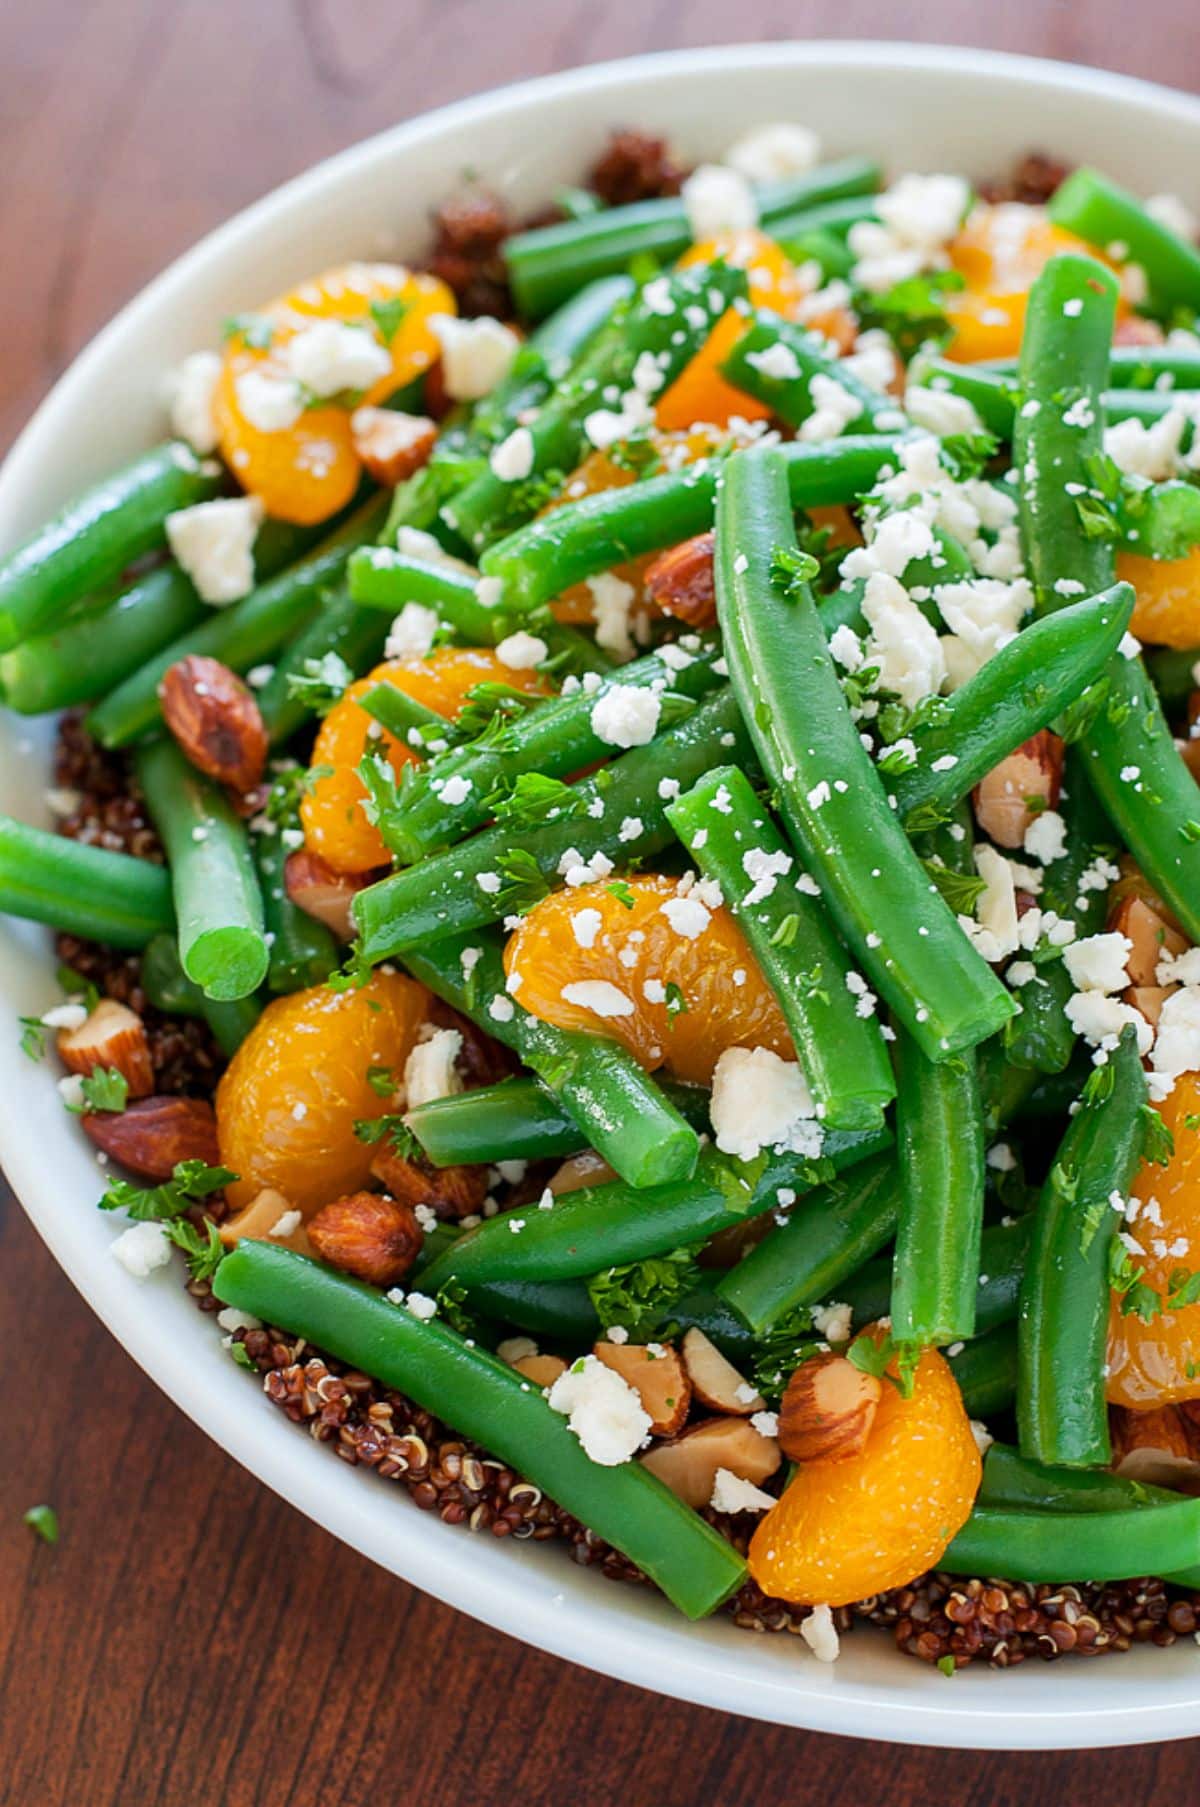 Healthy Green Bean Quinoa Salad With Maple Citrus Dressing in a white bowl.